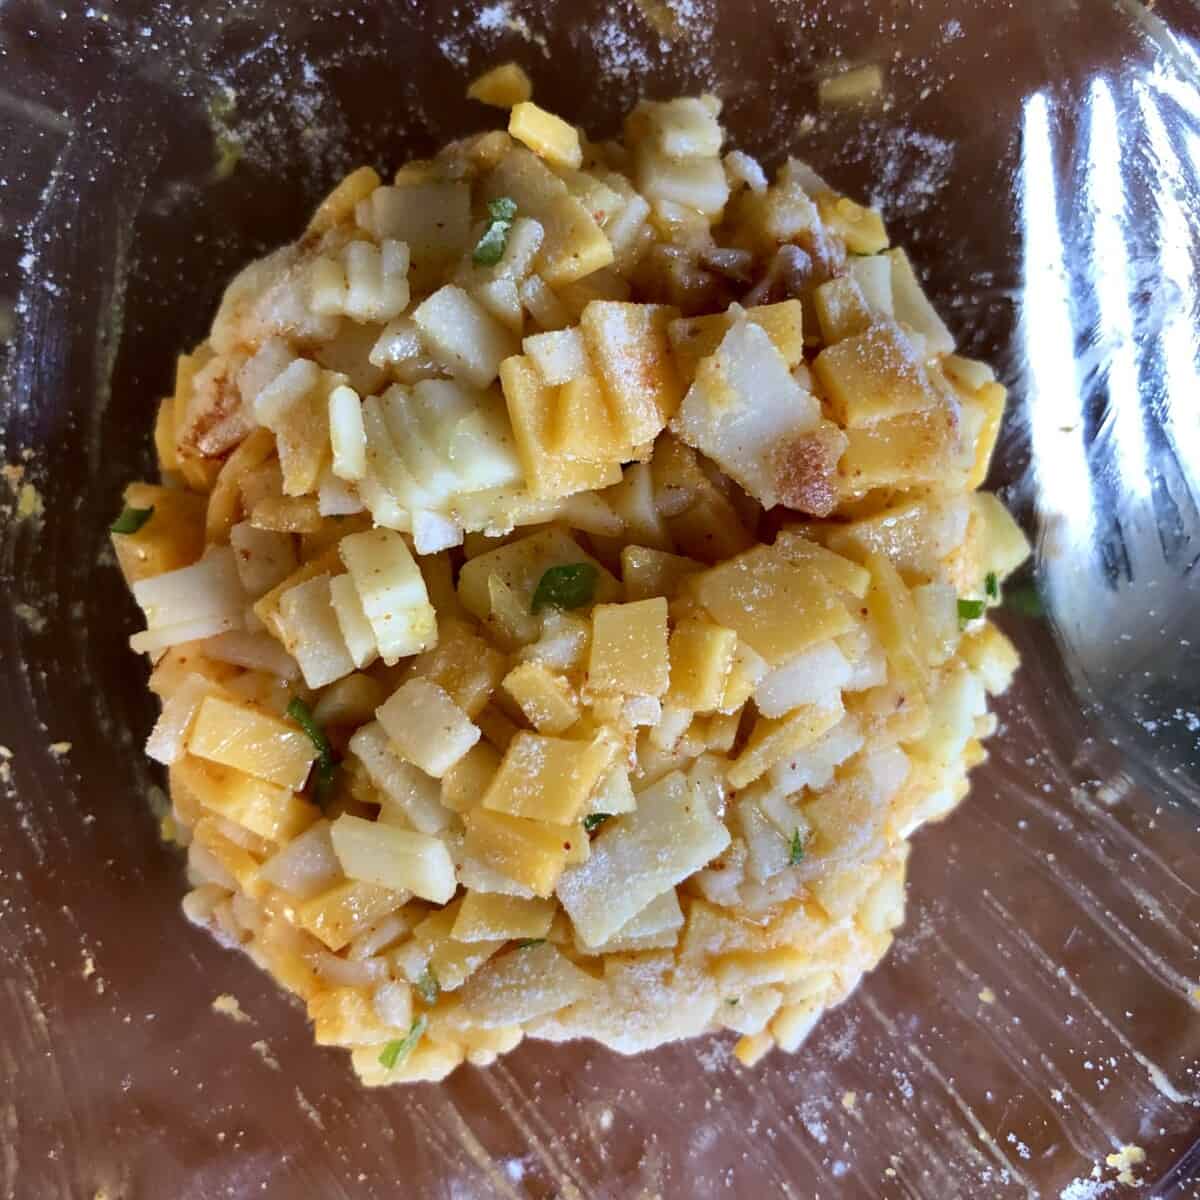 cheddar and provolone diced with scallions and bound with egg yolk and 1/4 teaspoon of flour formed into a round disc shape to put inside the mushroom